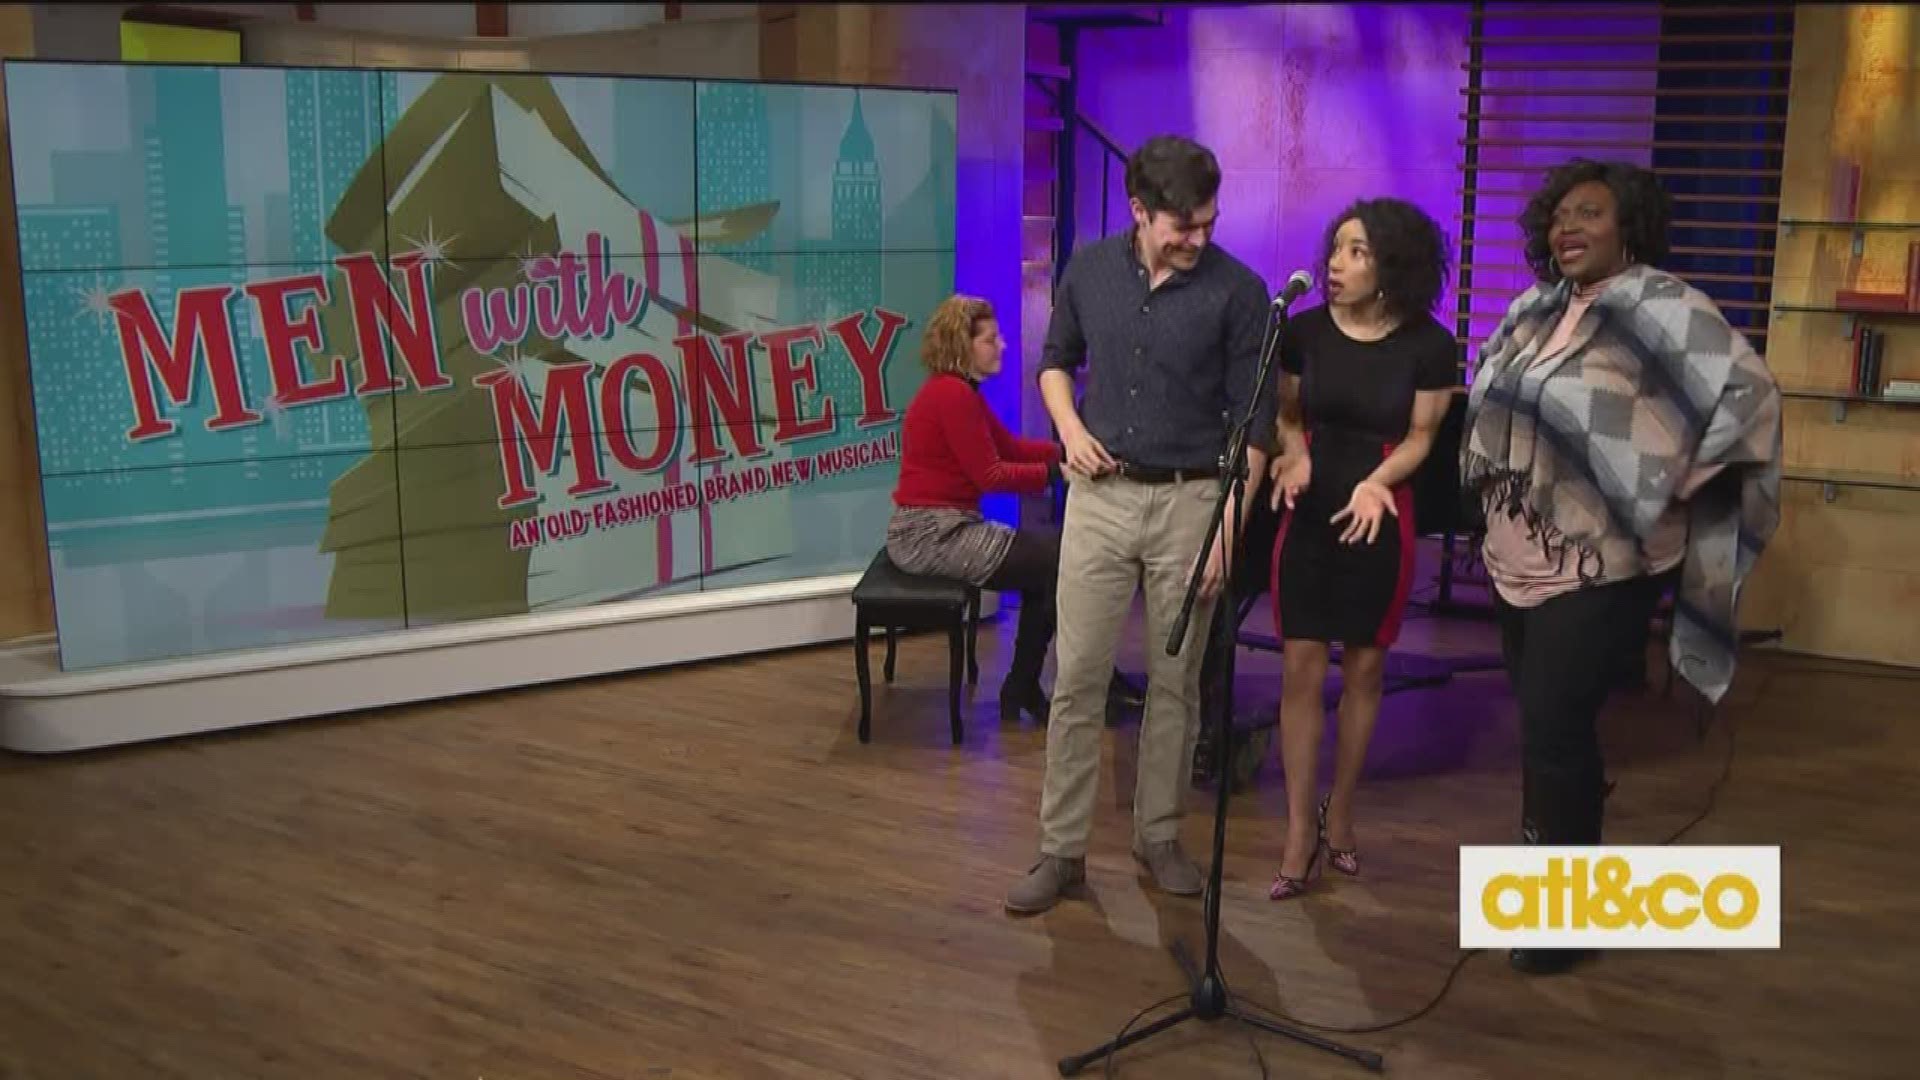 An interview and performance from the cast of "Men with Money" running March 7 -- April 7 at Aurora Theatre